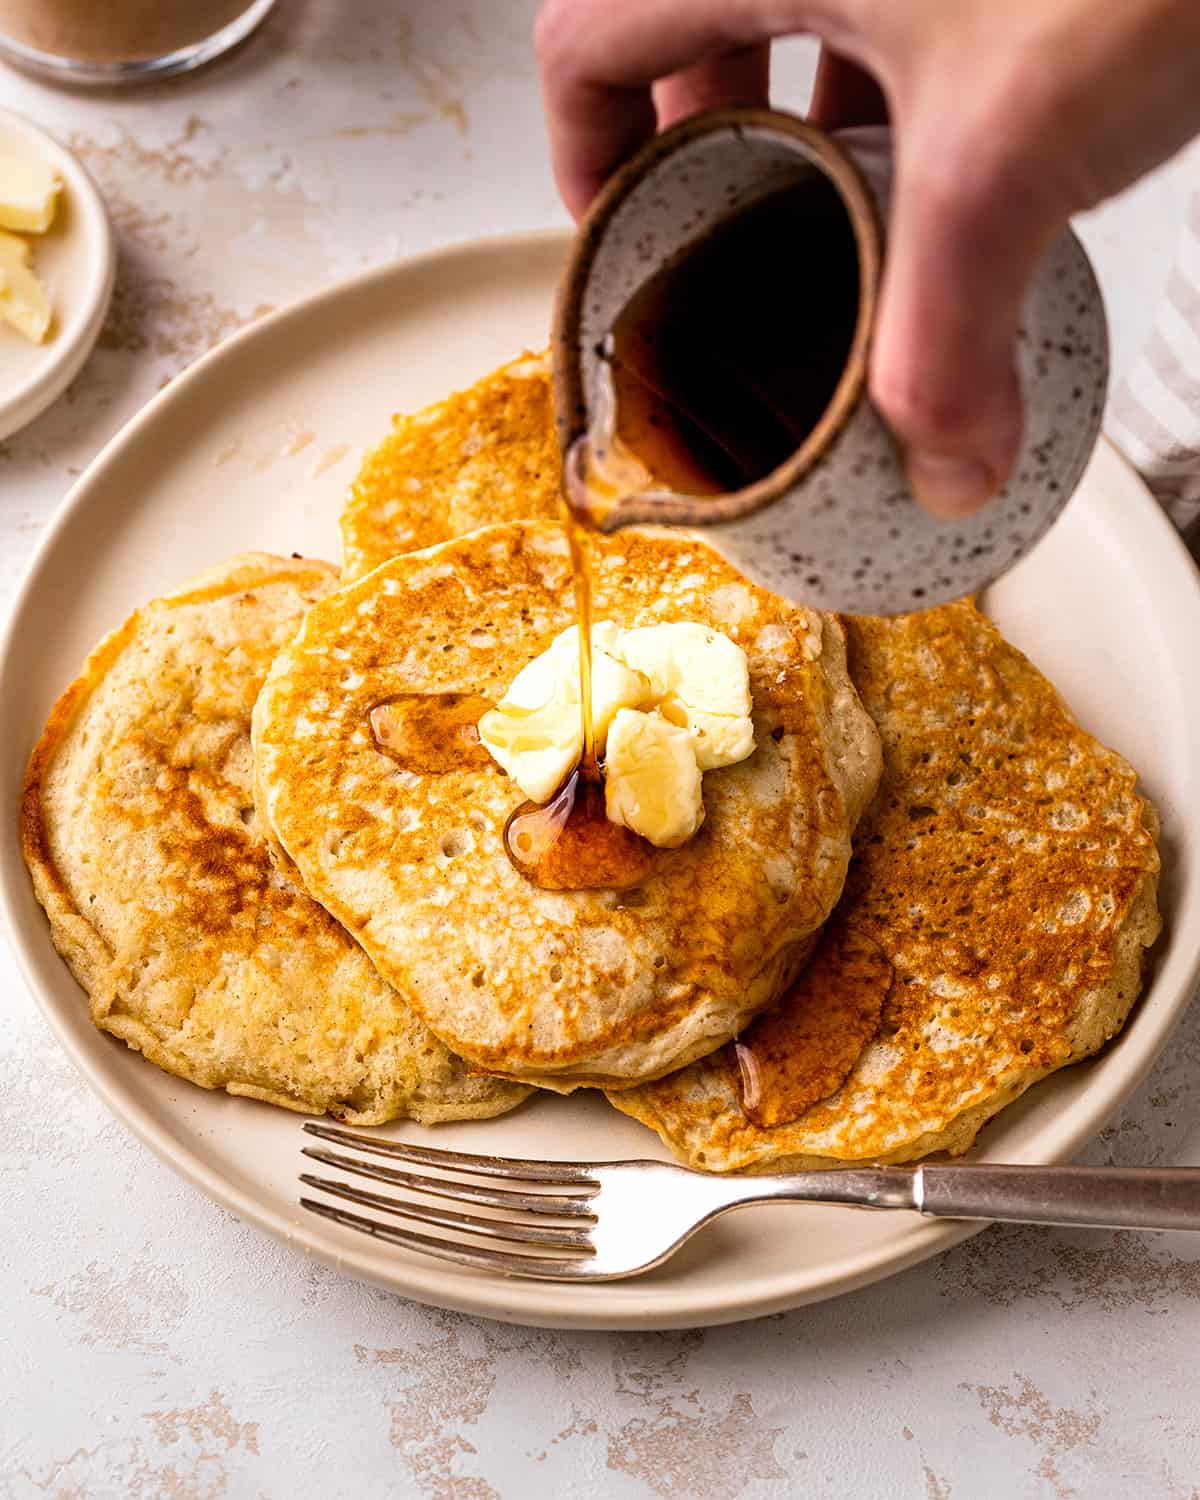 syrup being poured over 4 Buttermilk Pancakes on a plate with butter